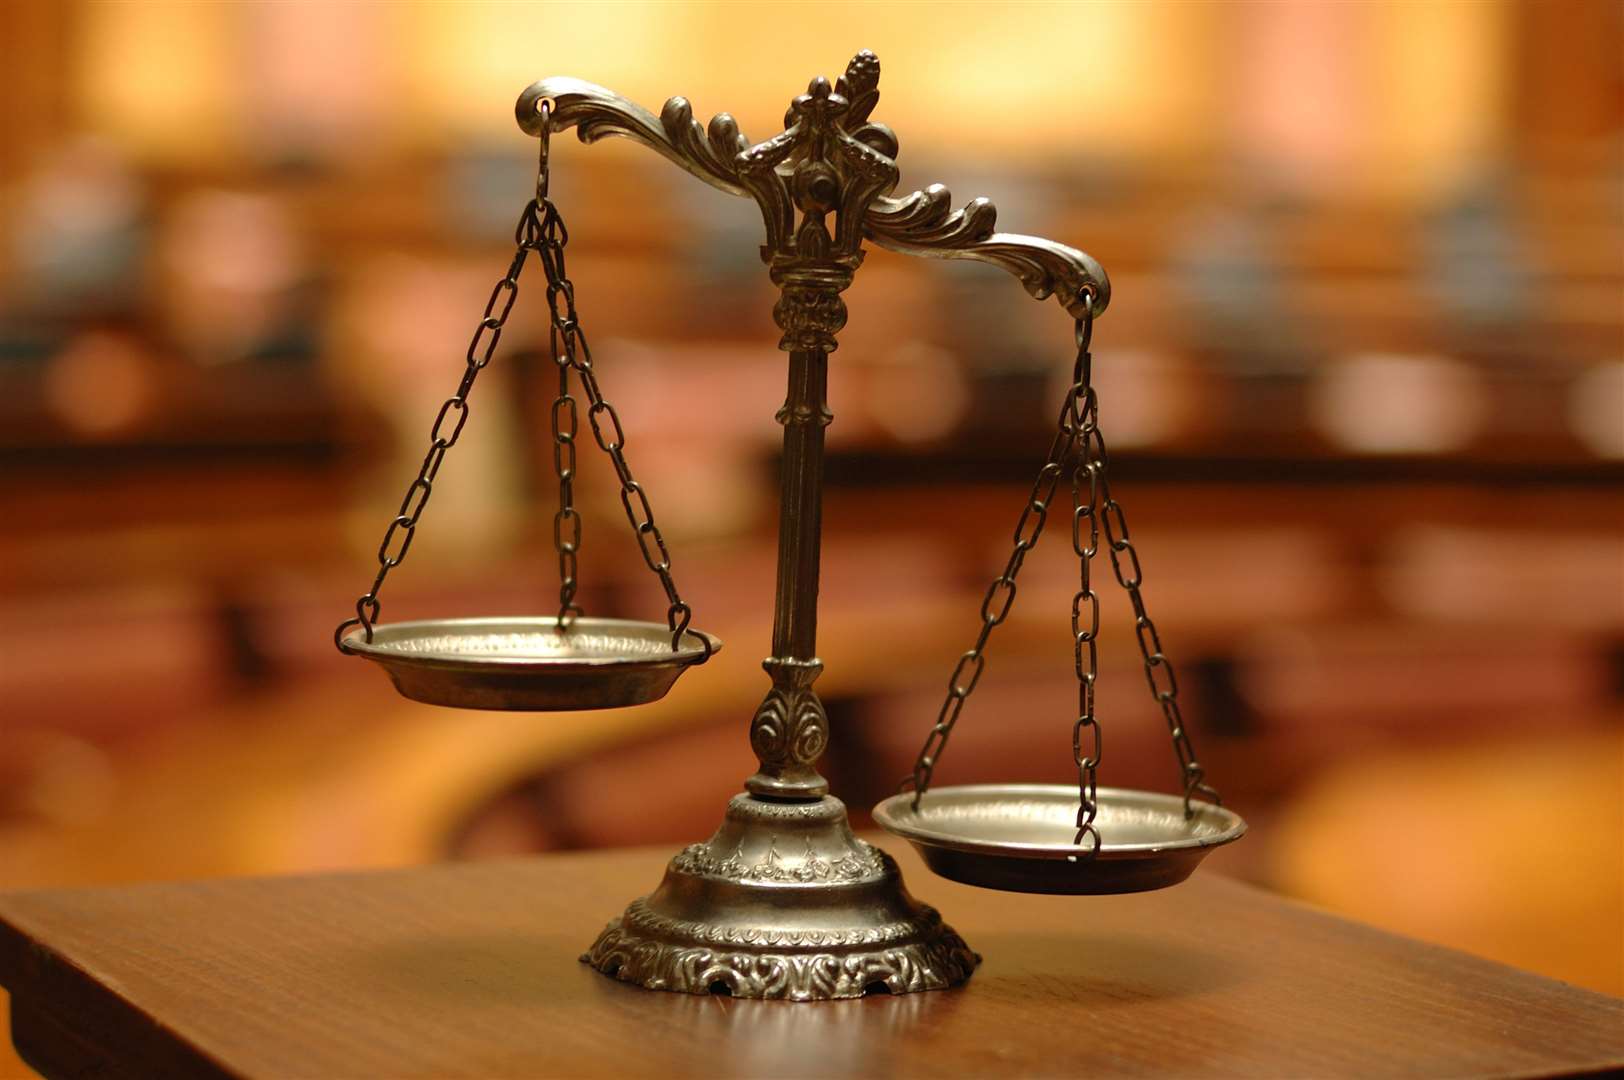 The Scales of Justice are the most familiar symbol associated with the law.